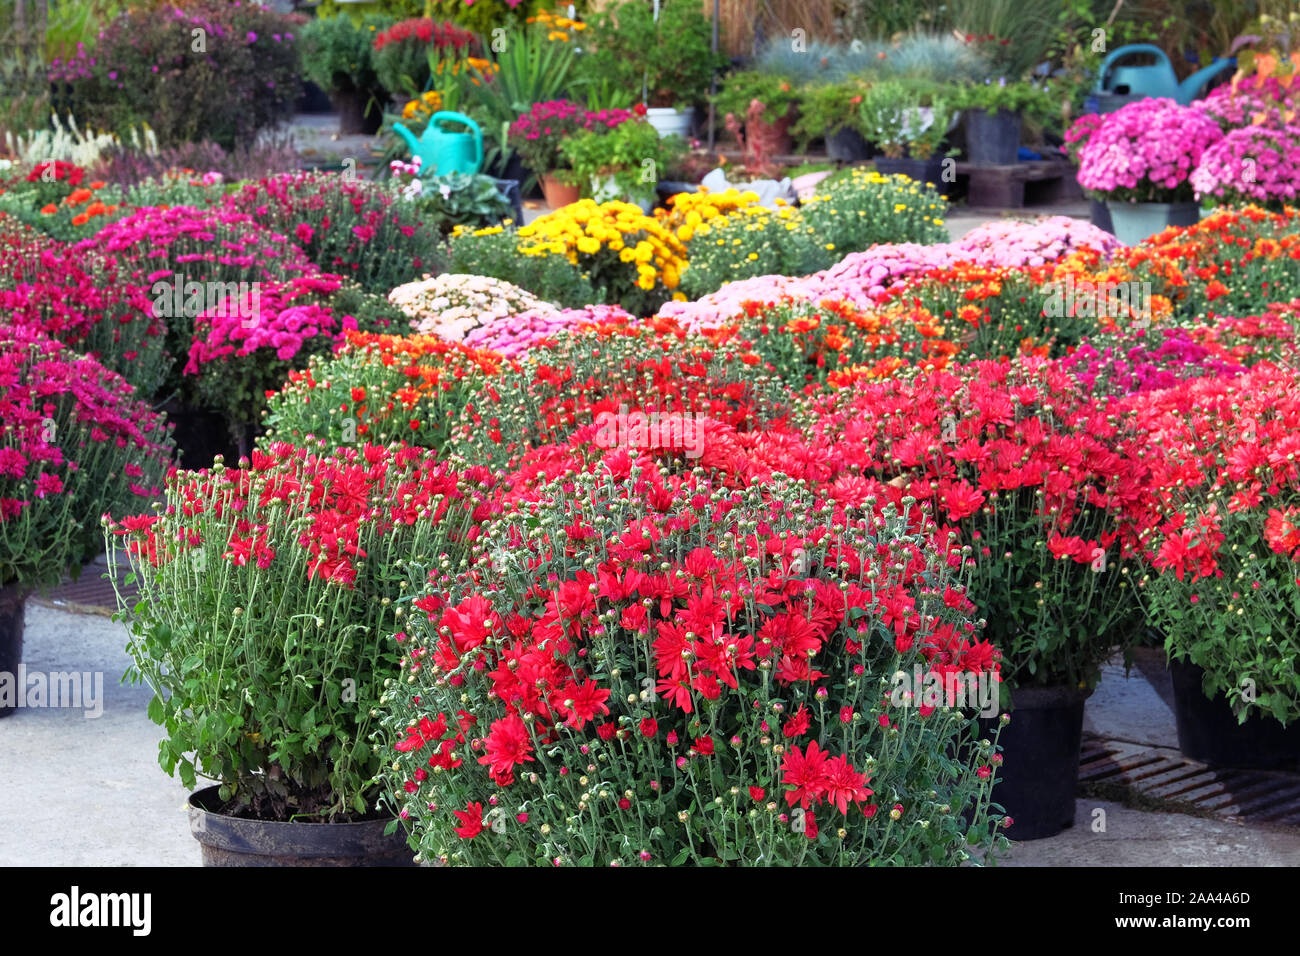 Potted hrysanthemums. Garden market with flowers. Bushes with hrysanthemums in pots in garden store. Nursery of plant for gardening and decoration. Stock Photo